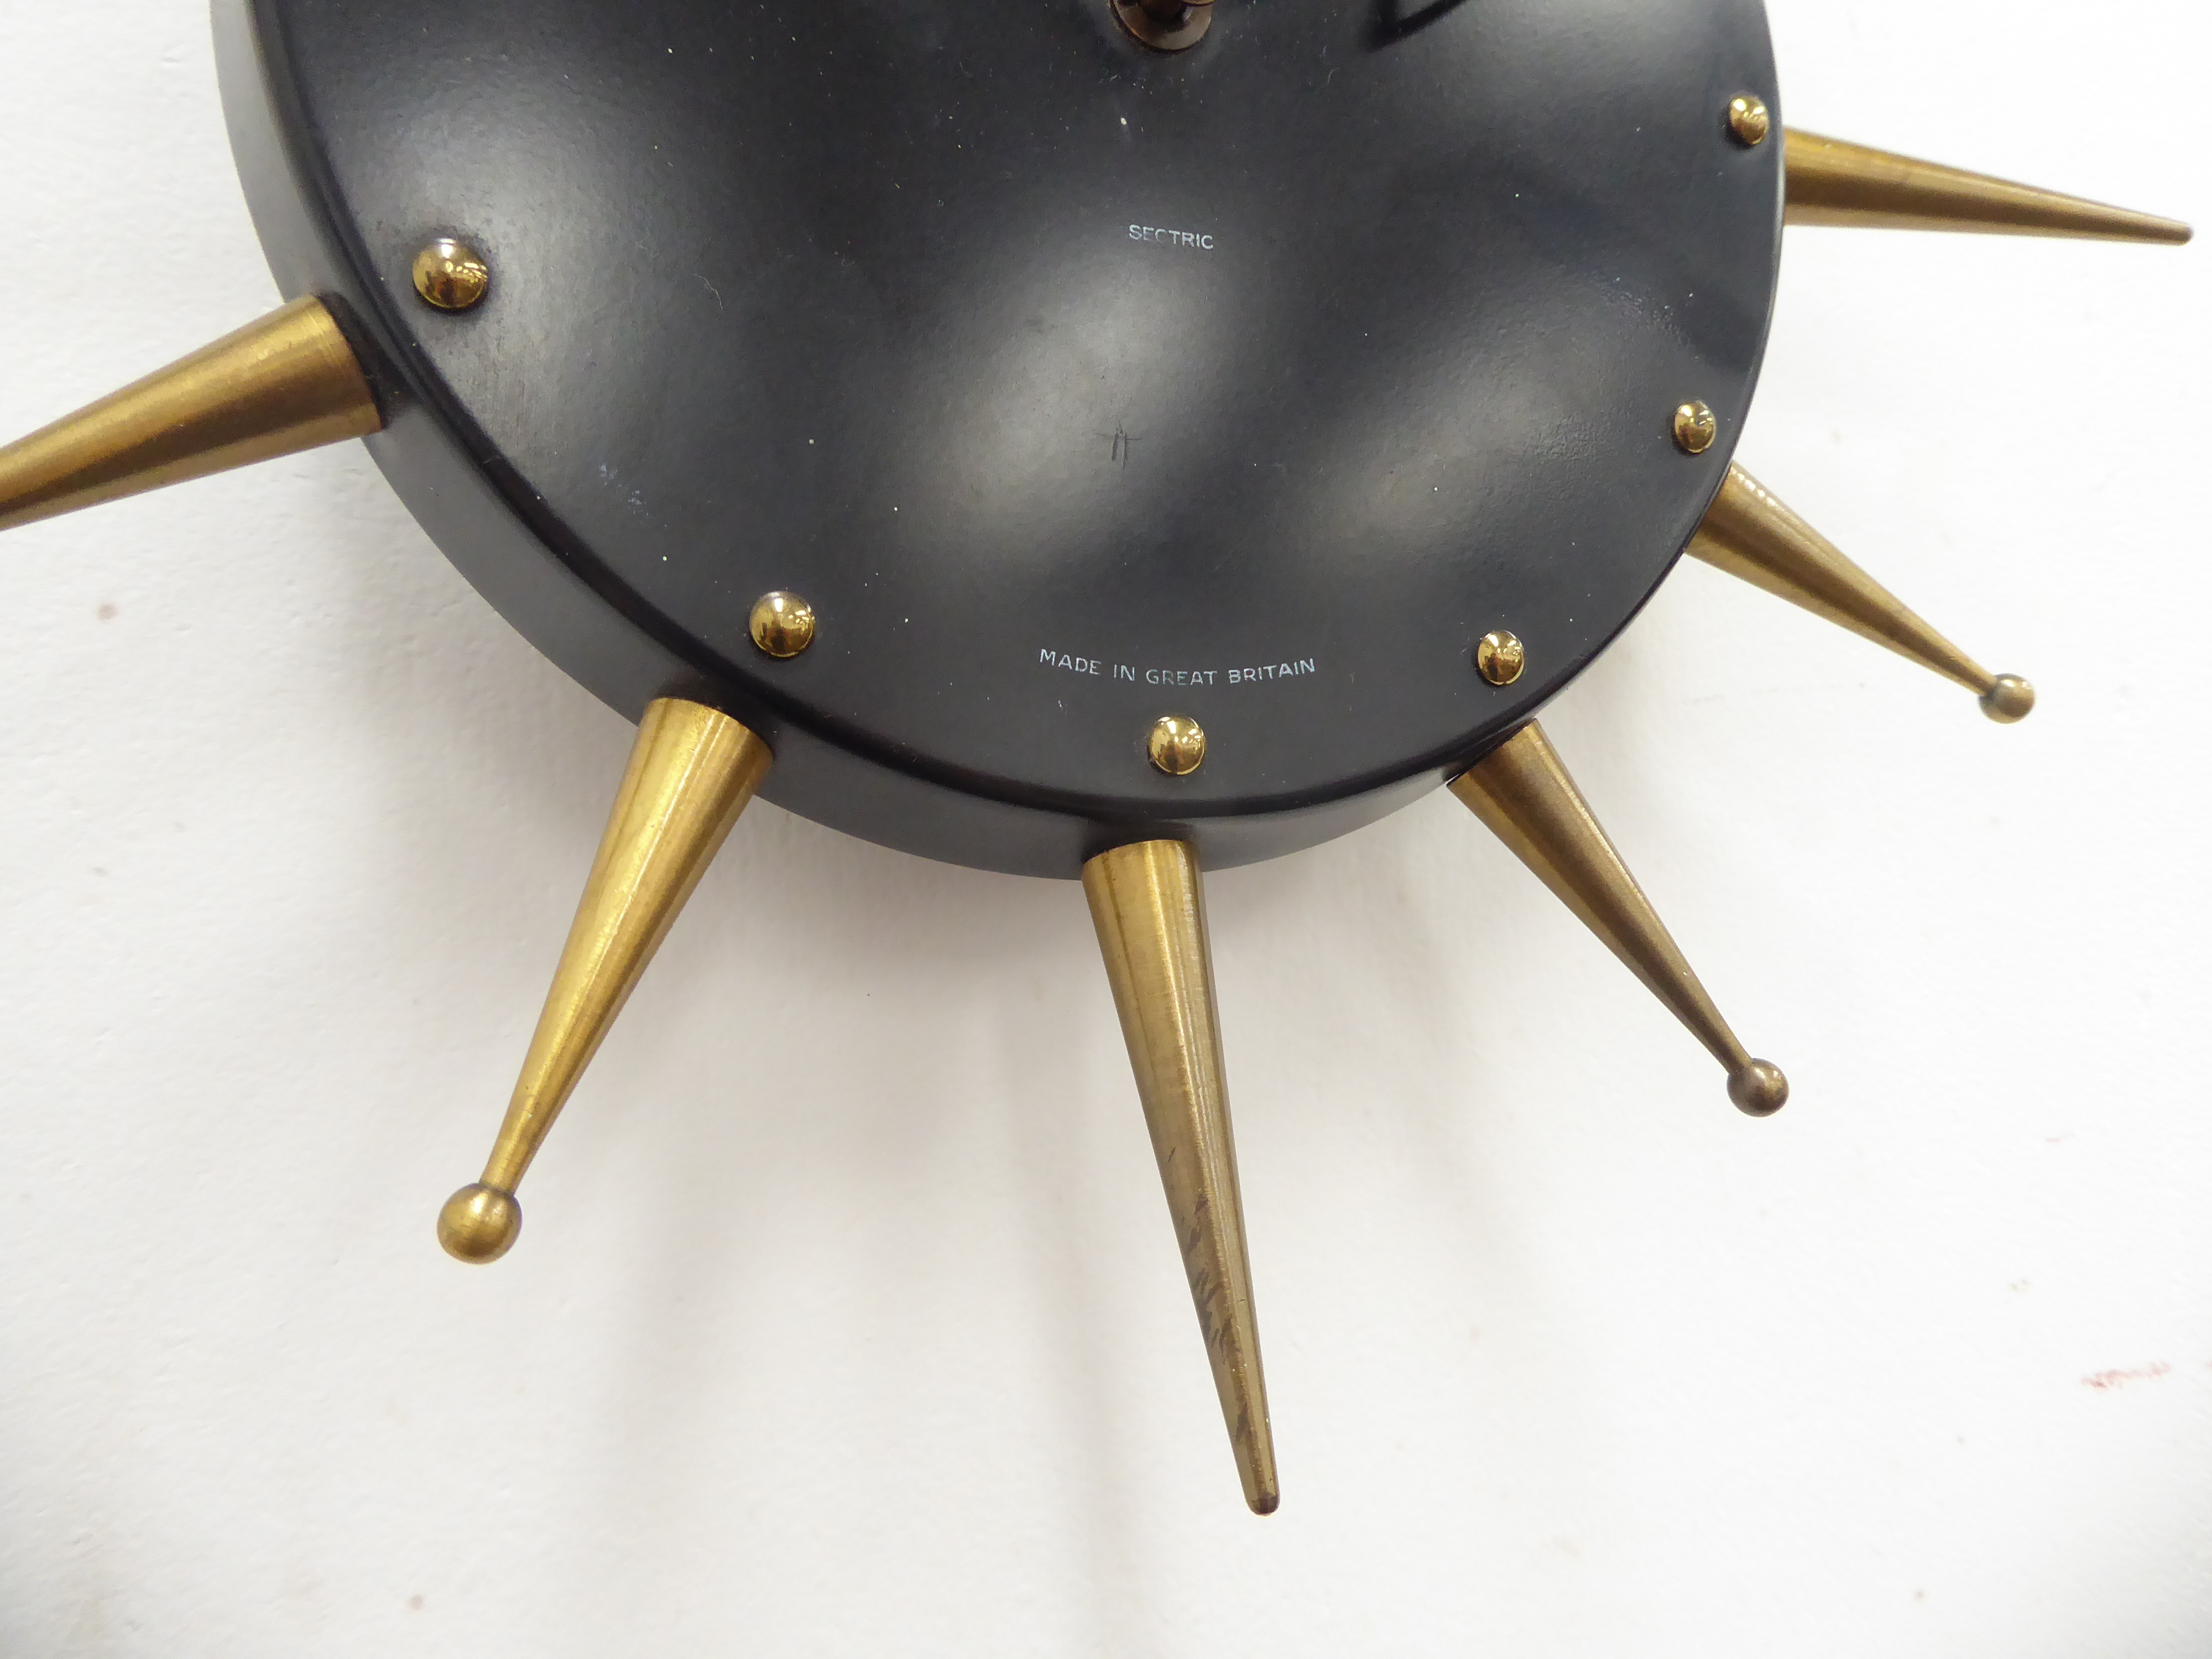 1950s 'Smiths Sectric' atomic electric wall clock, - Image 2 of 3